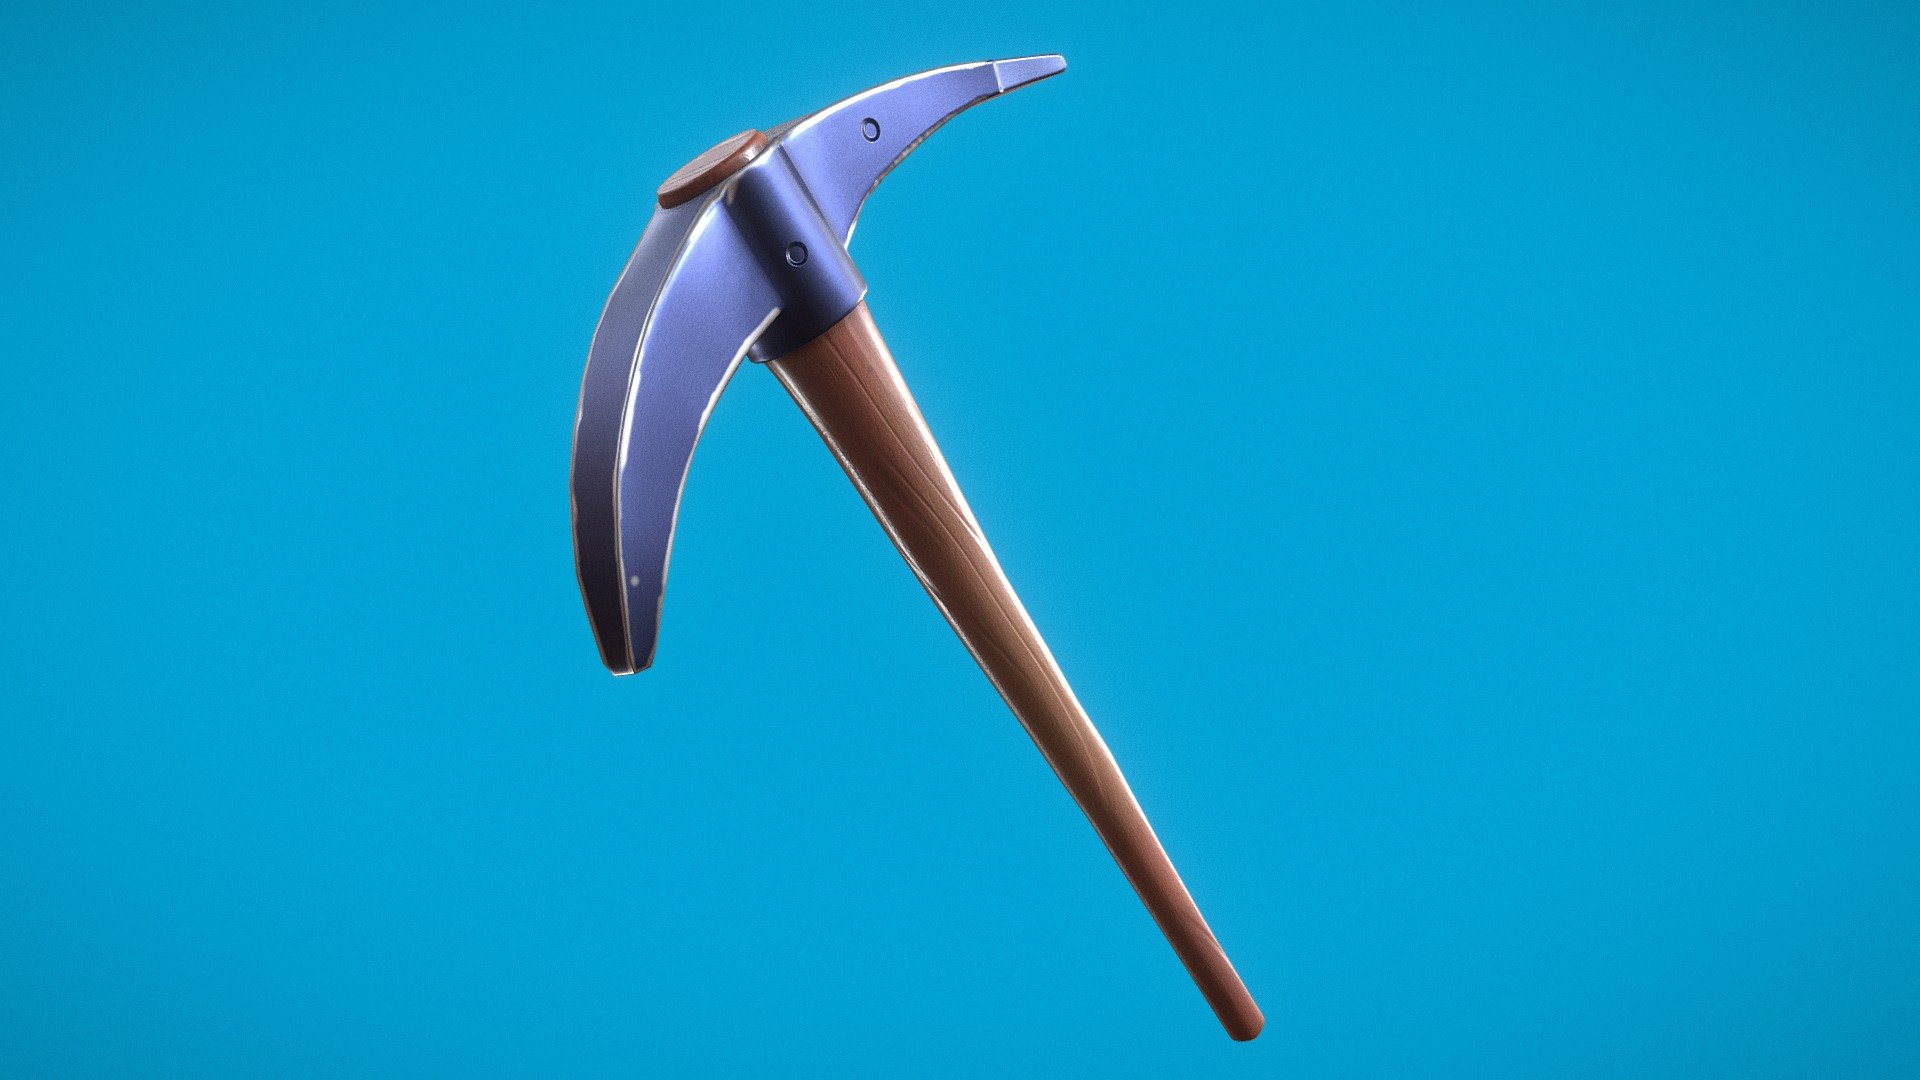 Fortnite Pickaxe which i modeled in Blender and textured in Substance Painter 3d model